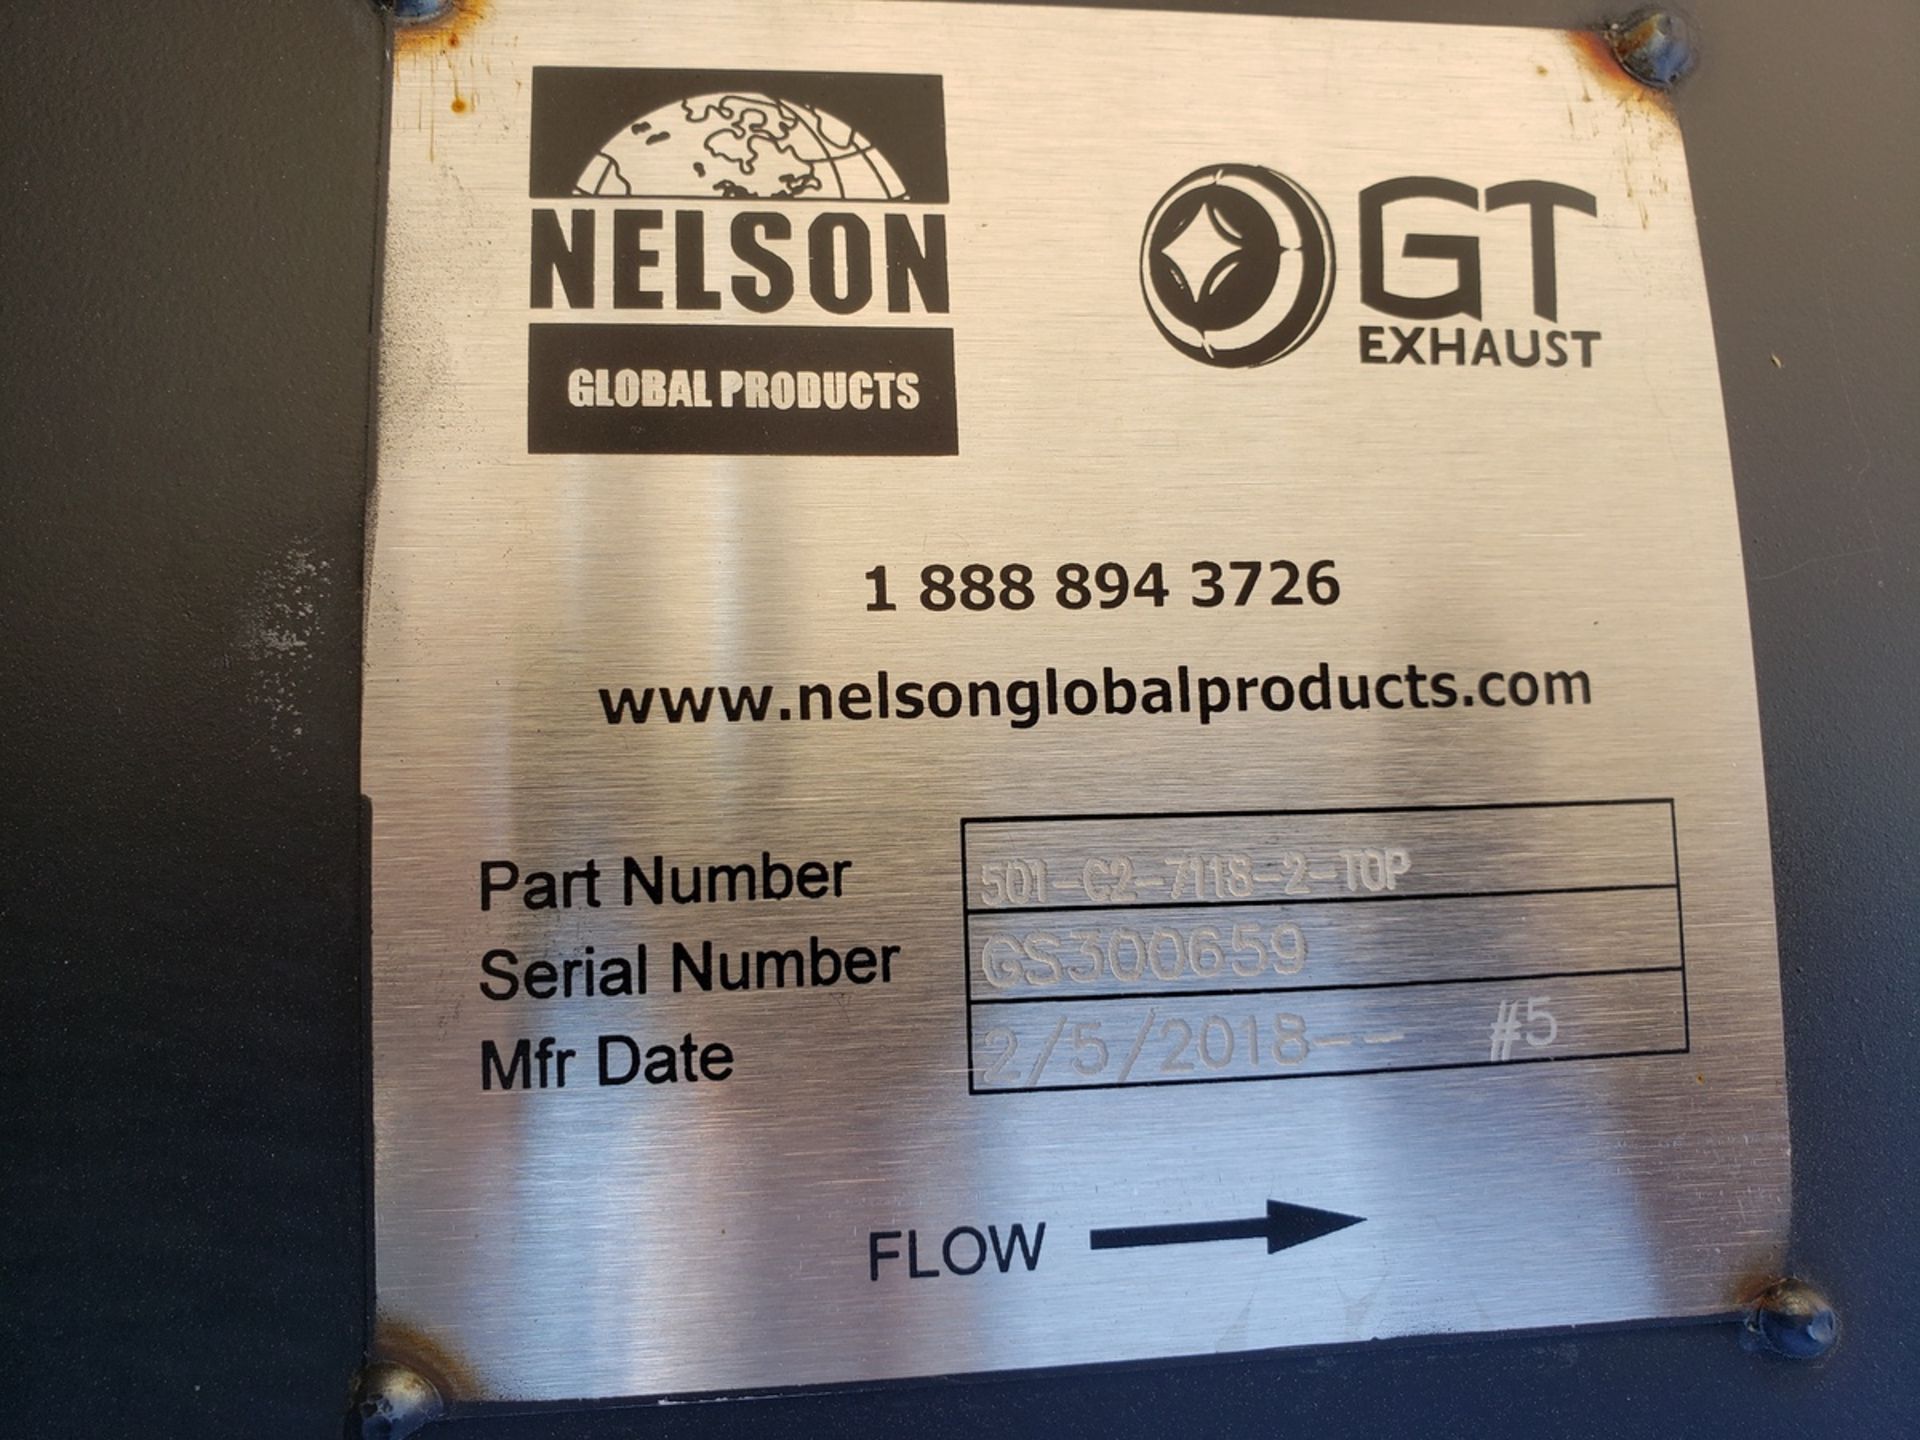 Nelson Standby Generator Muffler, M# 501-C2-7118-2-Top, S/N GS300659-5 | Rig Fee: $325 - Image 2 of 2